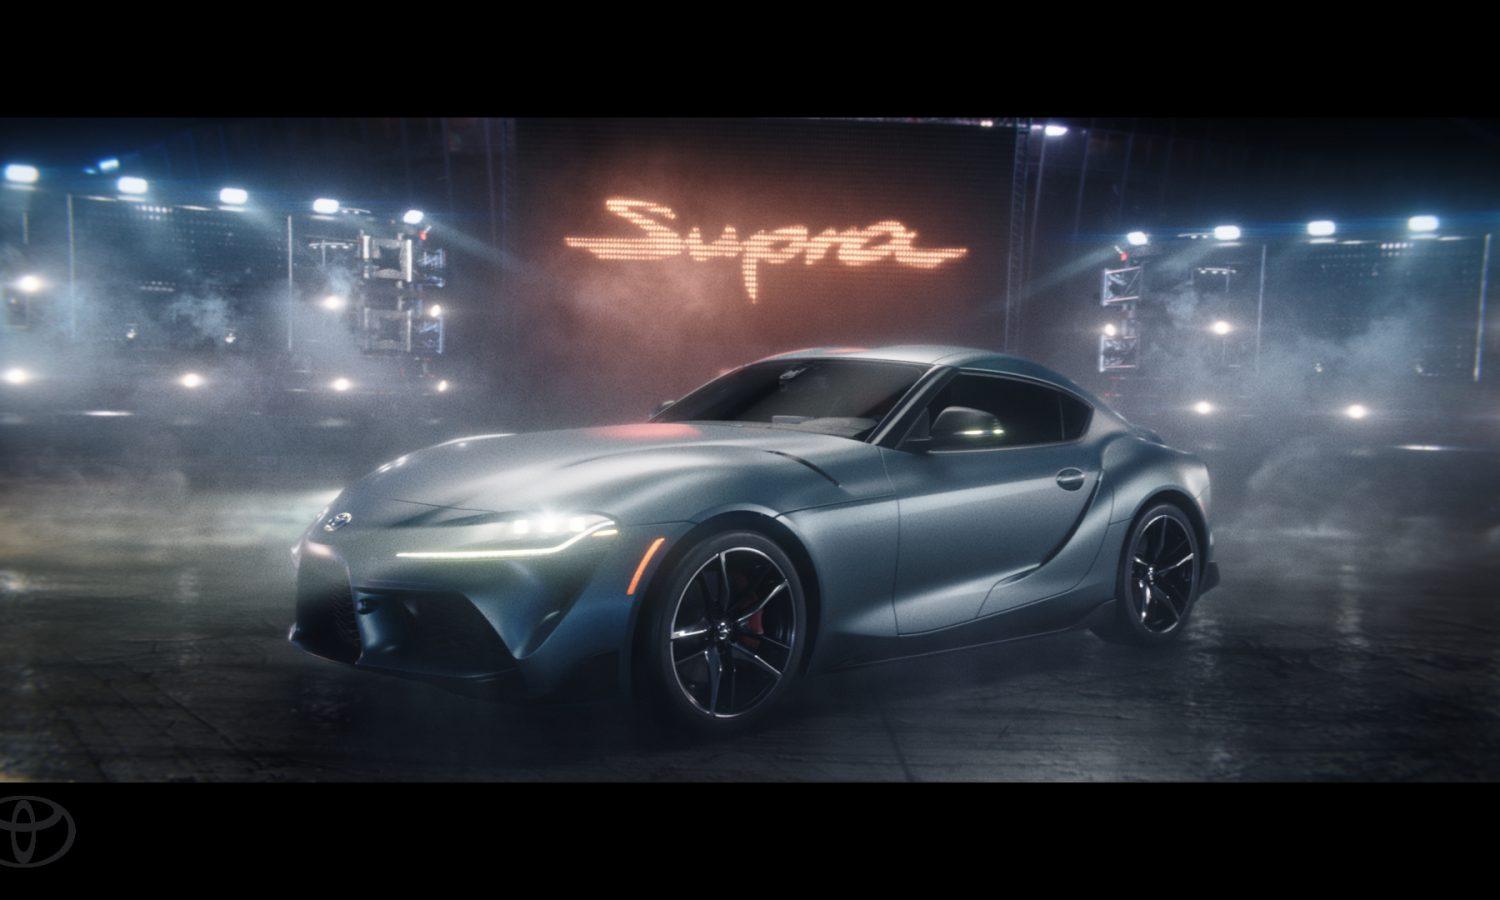 Toyota Supra Gets Into the Big Game With Commercial